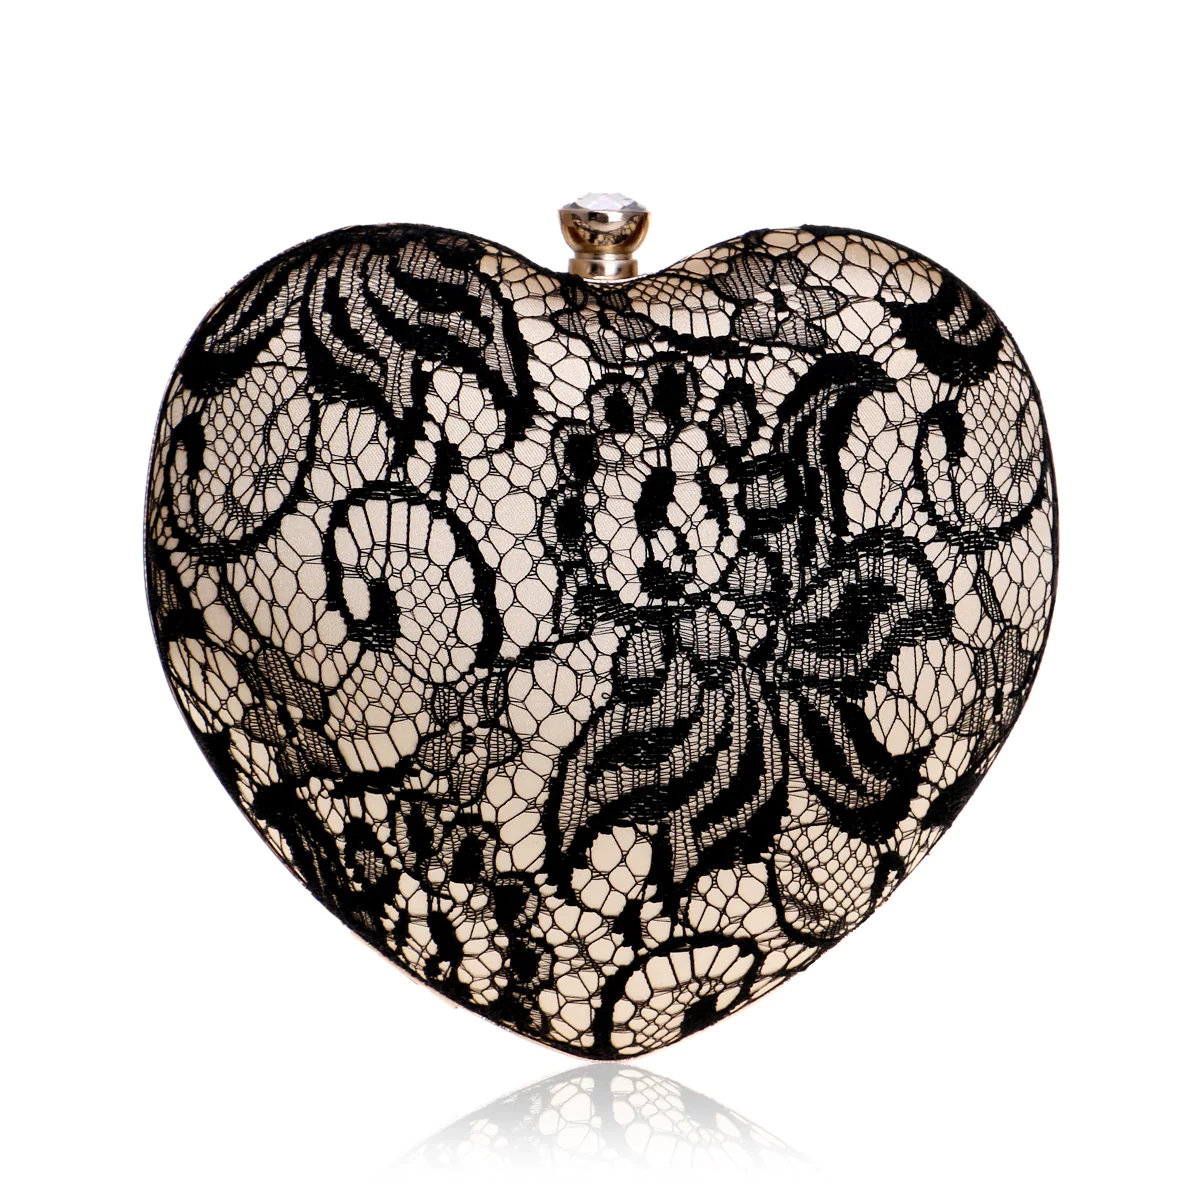 Heart Shape Lace Evening Bag Small Tote Clutch Purse for Ladies01